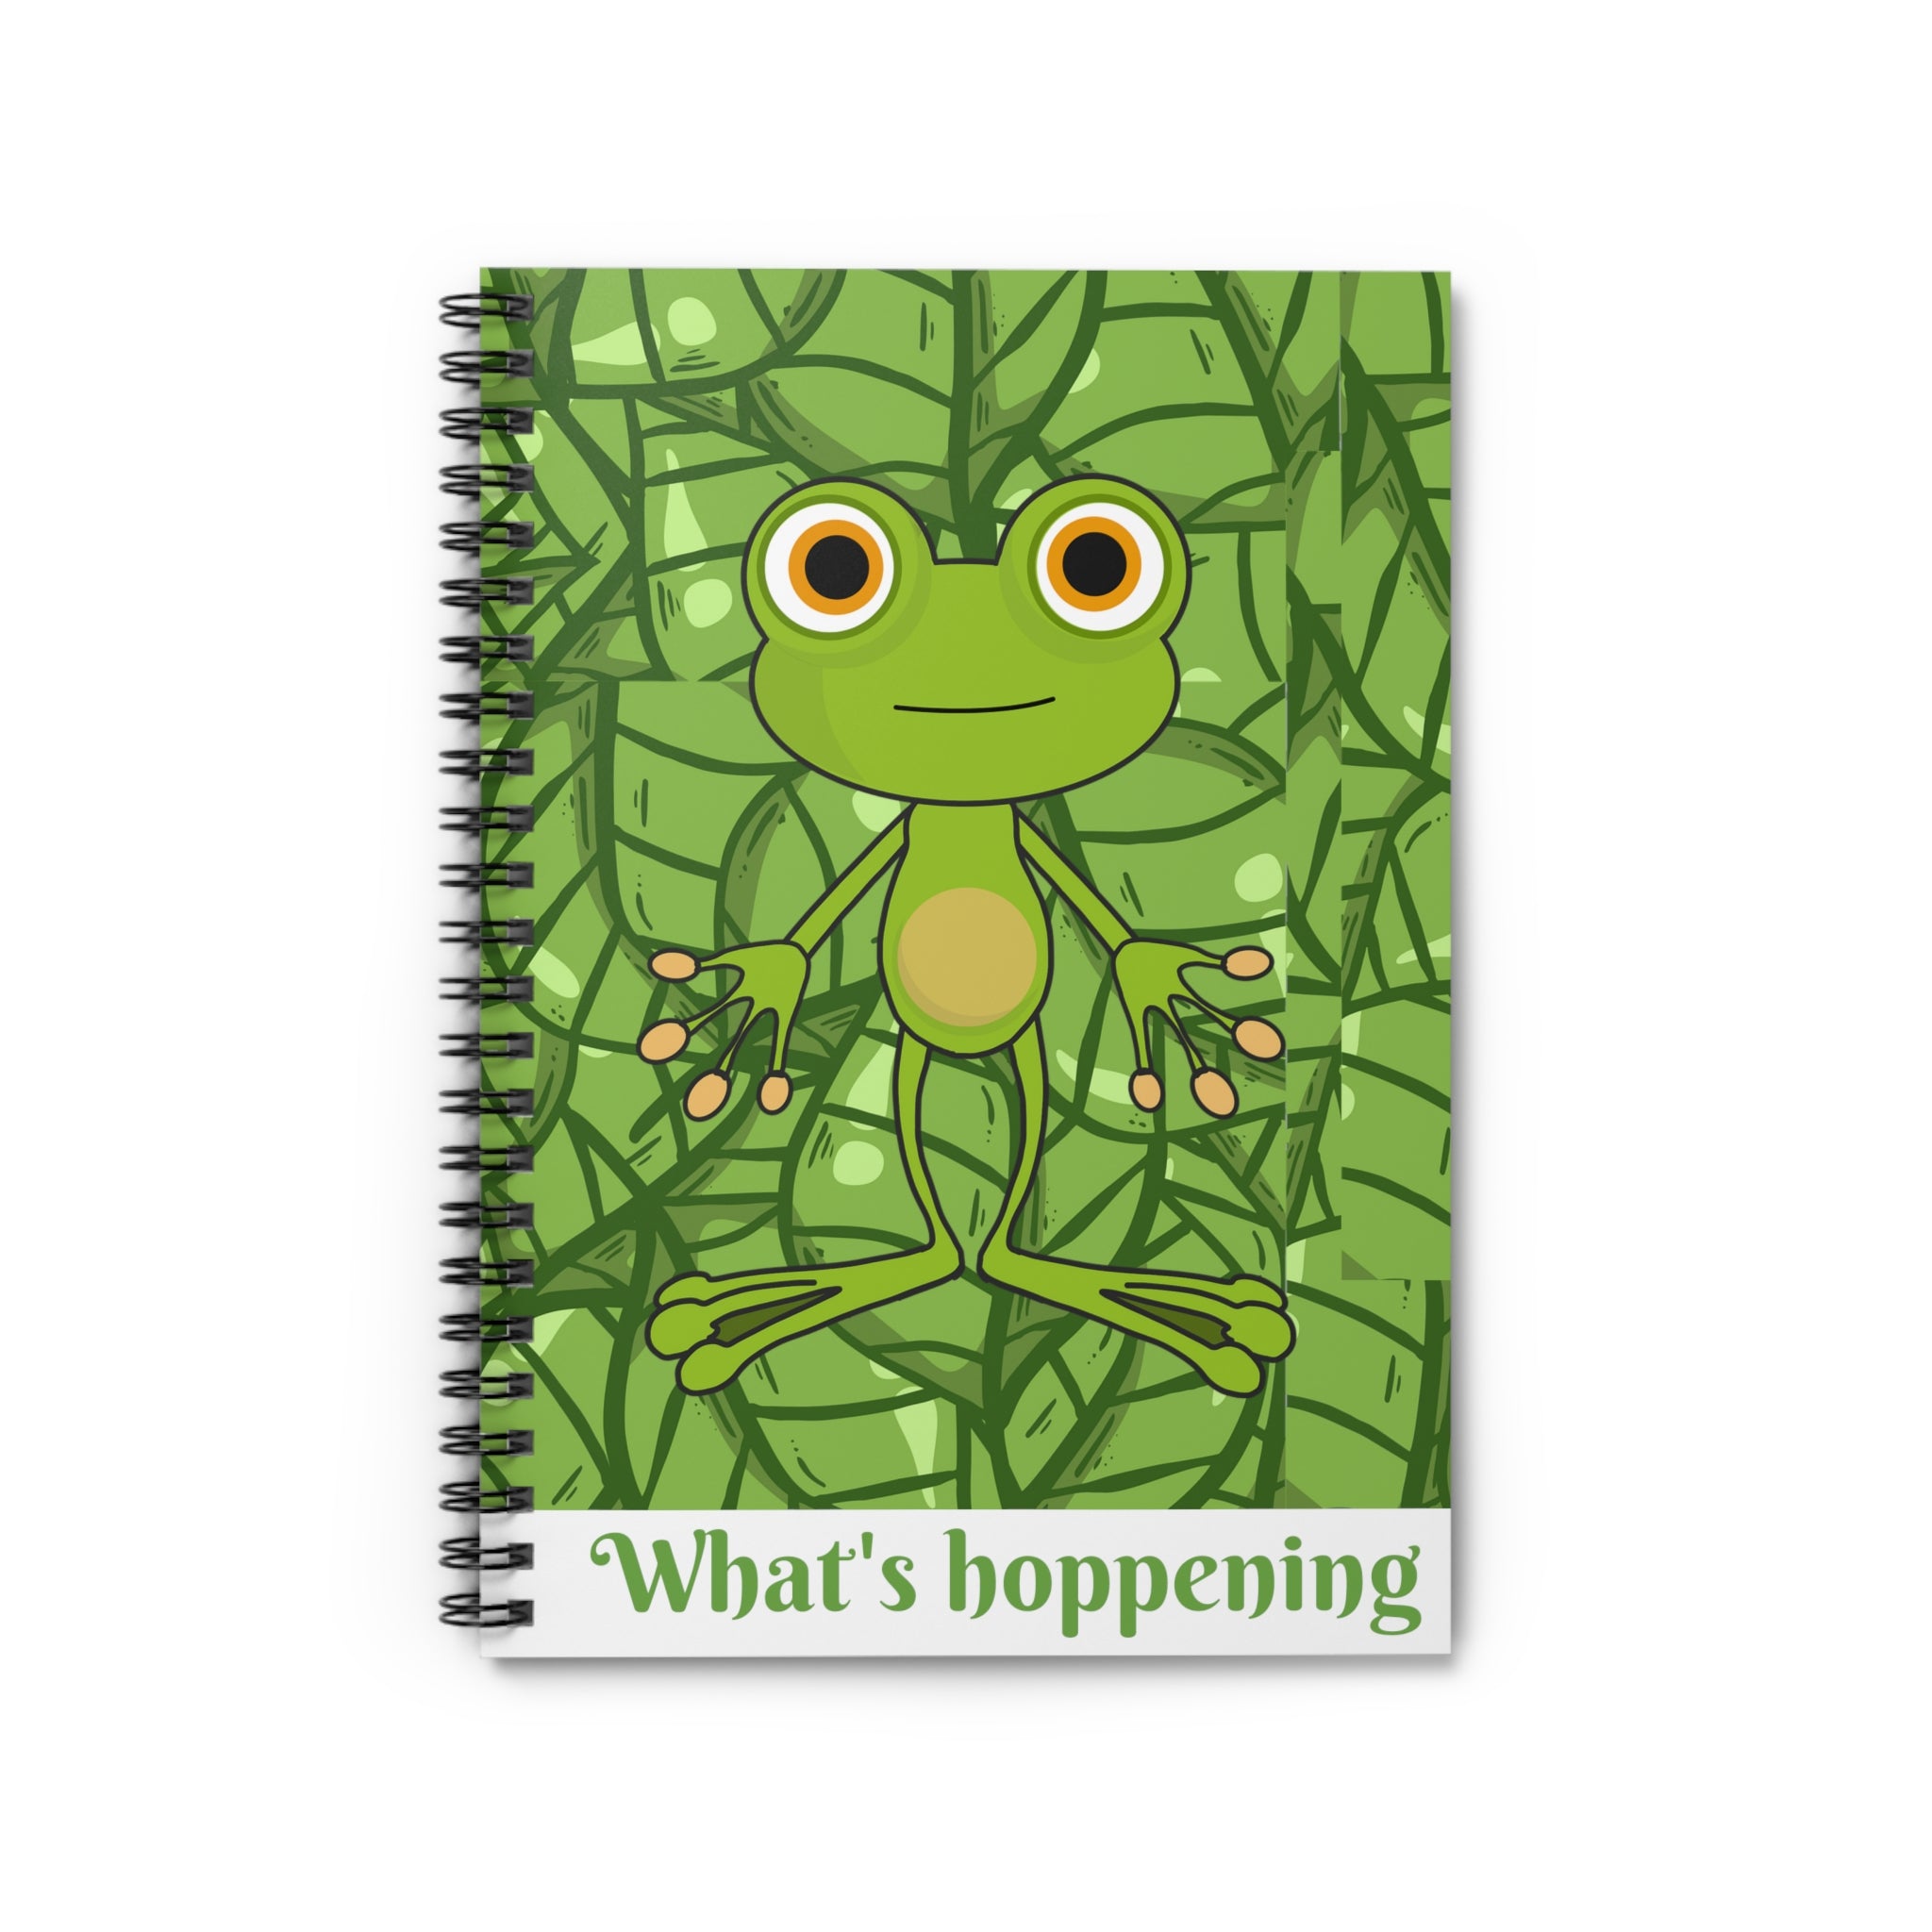 What's Hoppening, Spiral Lined Notebook